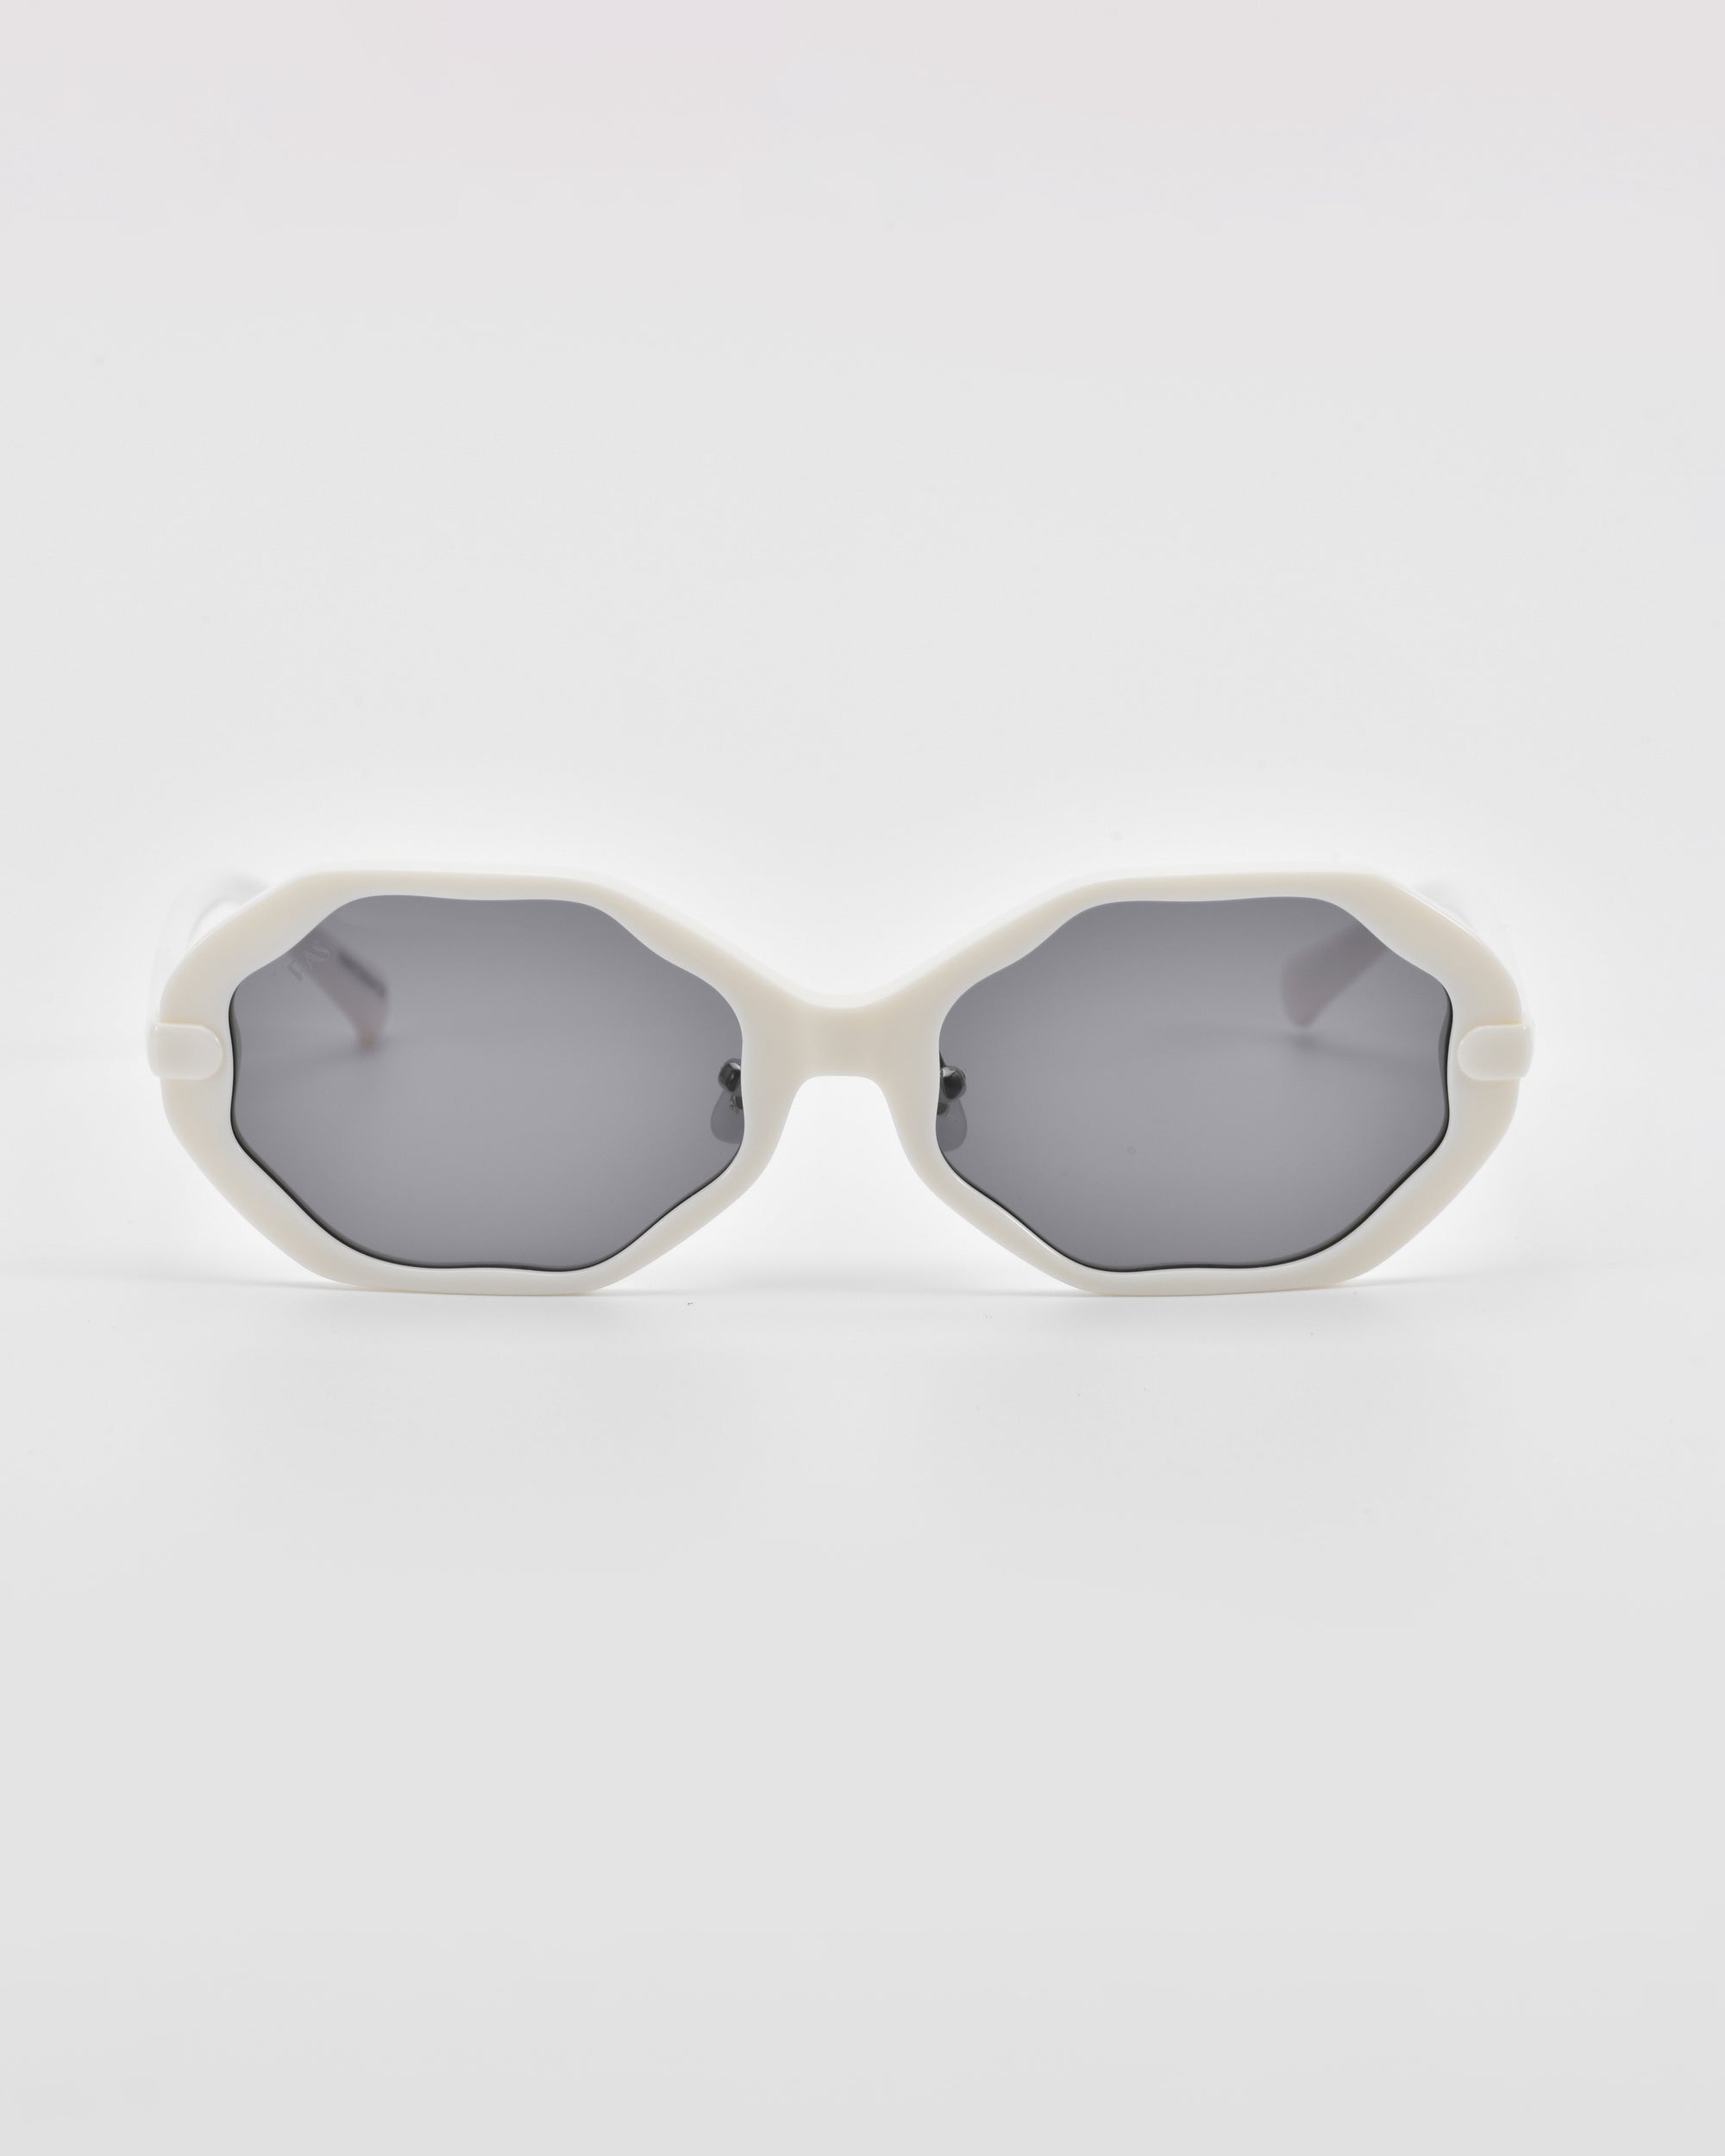 White, geometric-framed For Art&#39;s Sake® Lotus sunglasses with dark gray lenses, featuring an angular silhouette and shown against a plain white background.